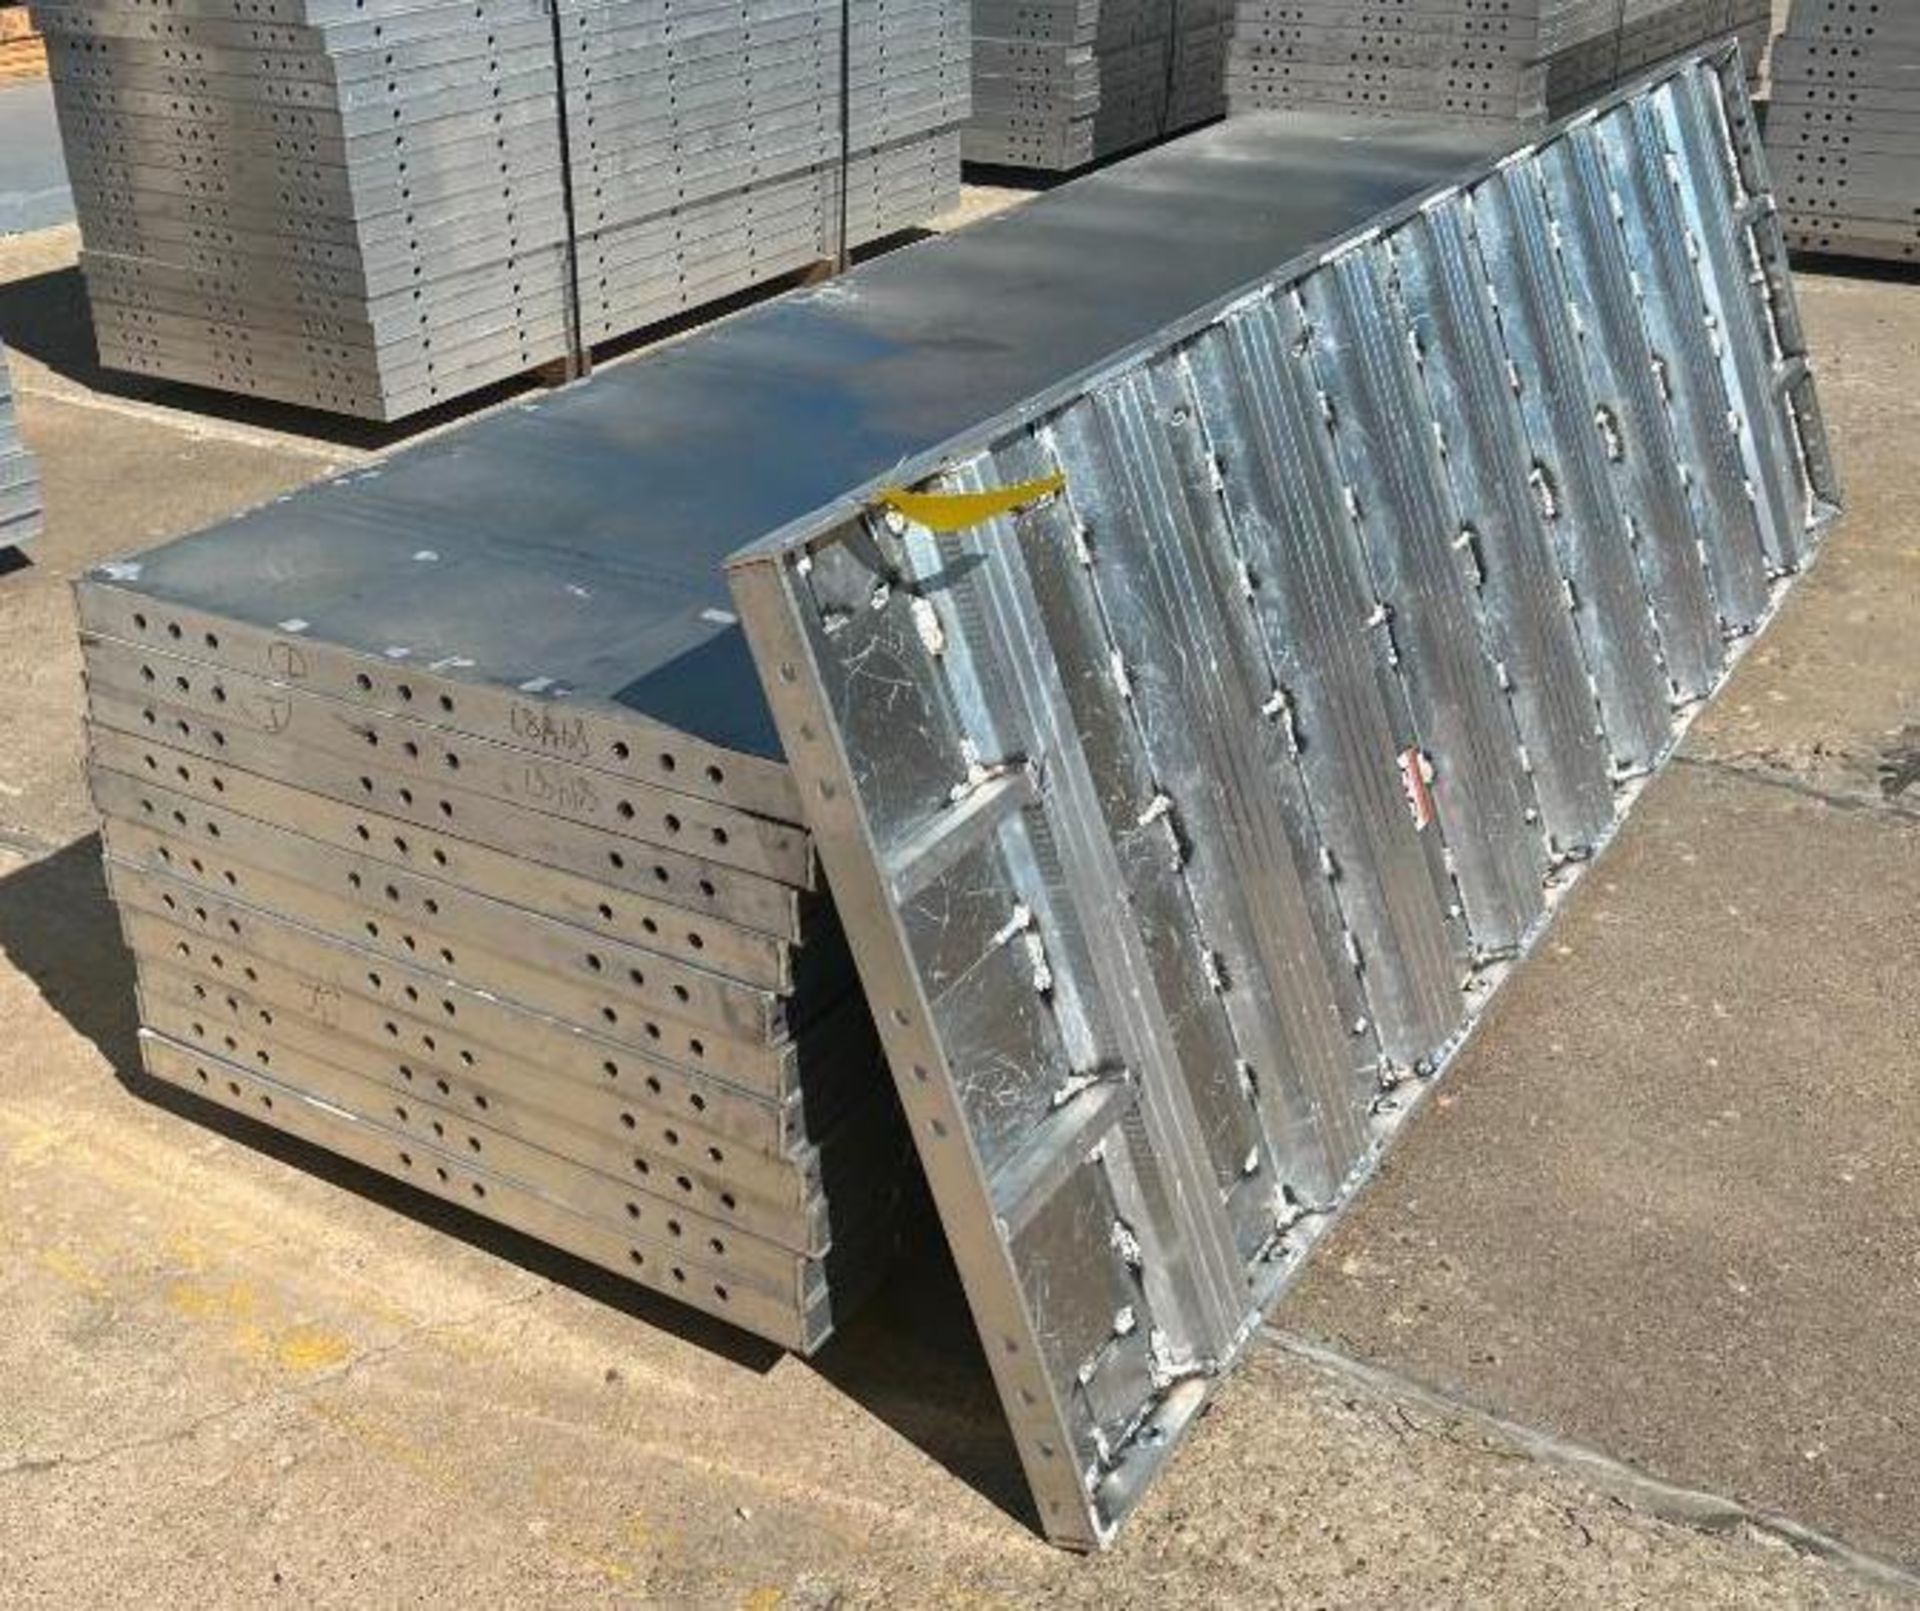 (12) NEW 3' x 10' Wall Ties Aluminum Concrete Forms, 6-12 Hole Pattern. Located in Mt. Pleasant, IA